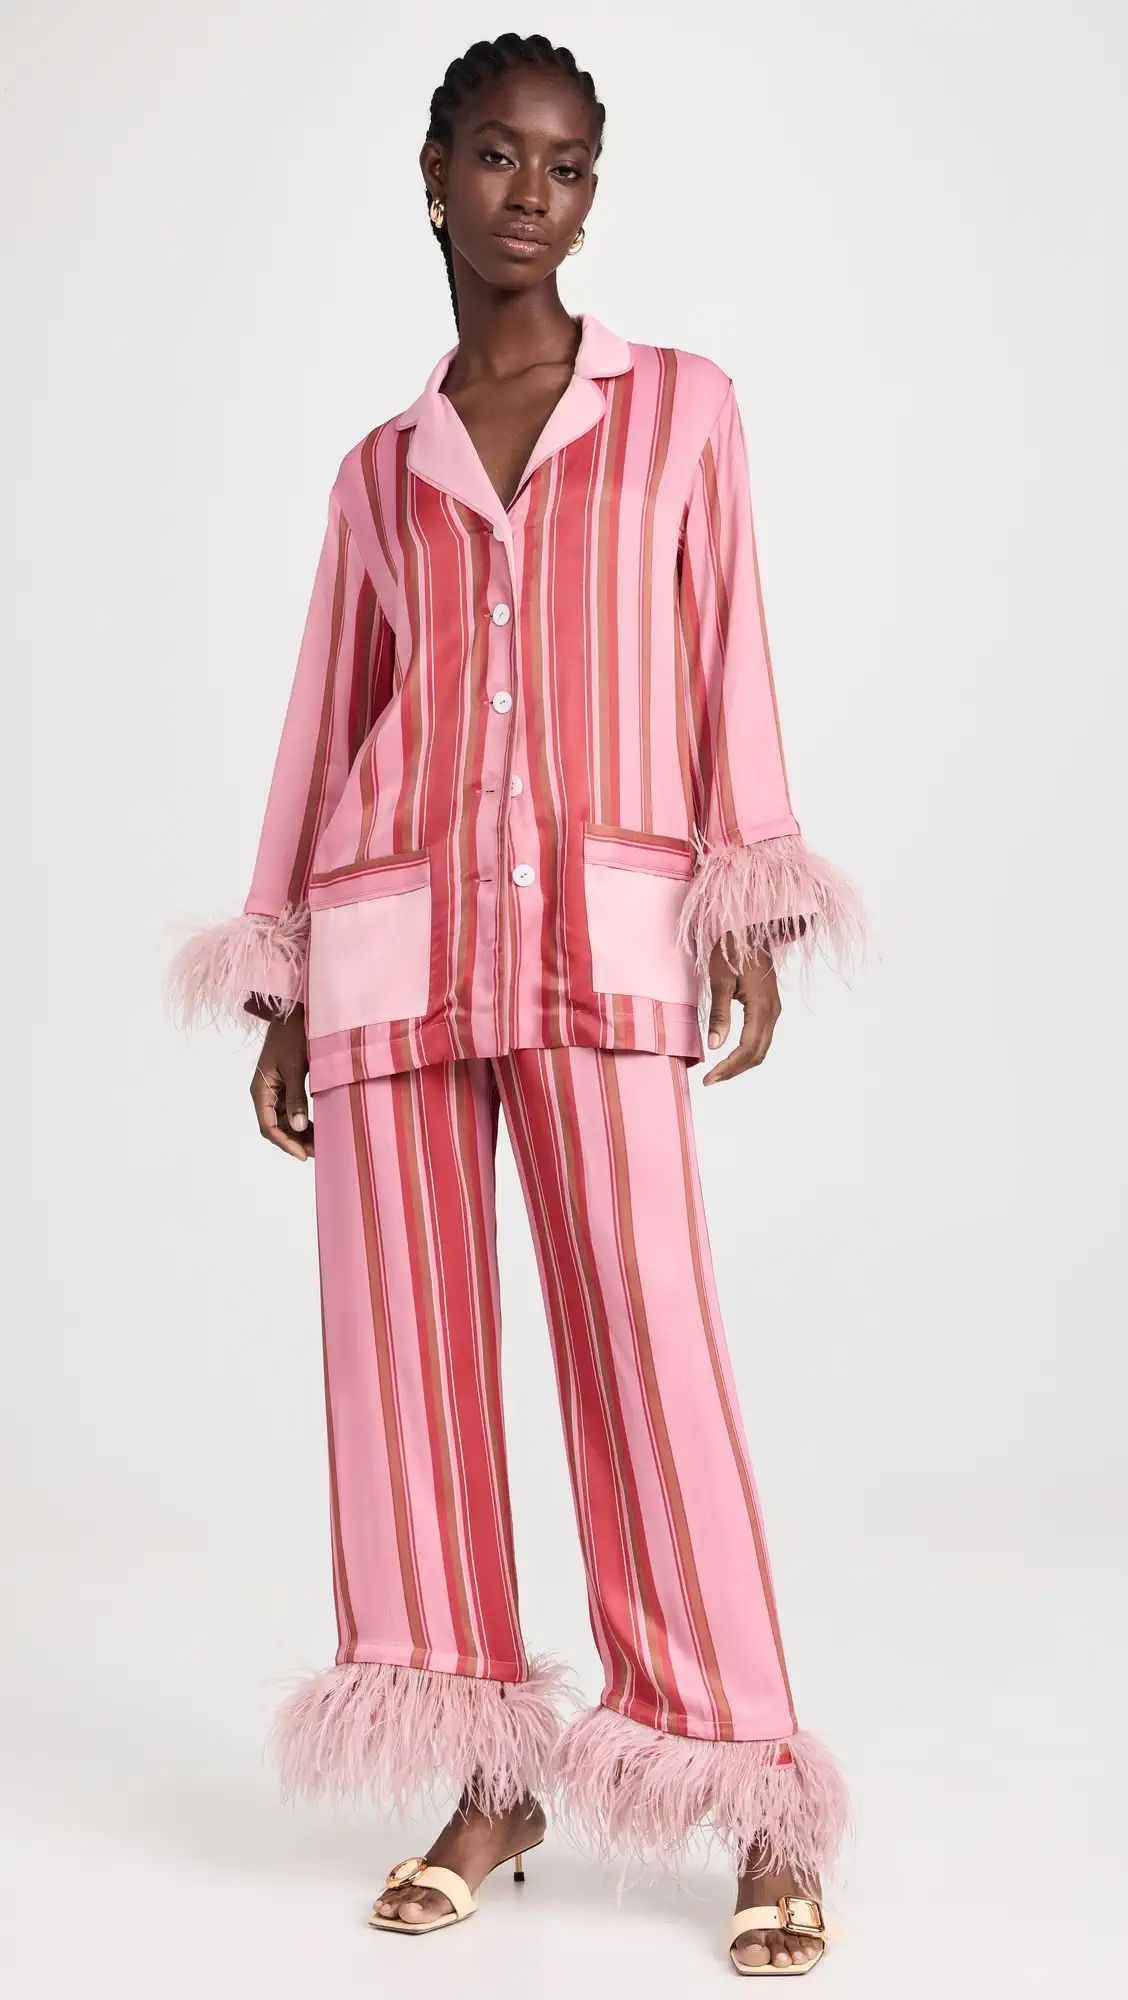 Sleeper Party Pajama with Detachable Feathers in Pink Stripes | Shopbop | Shopbop